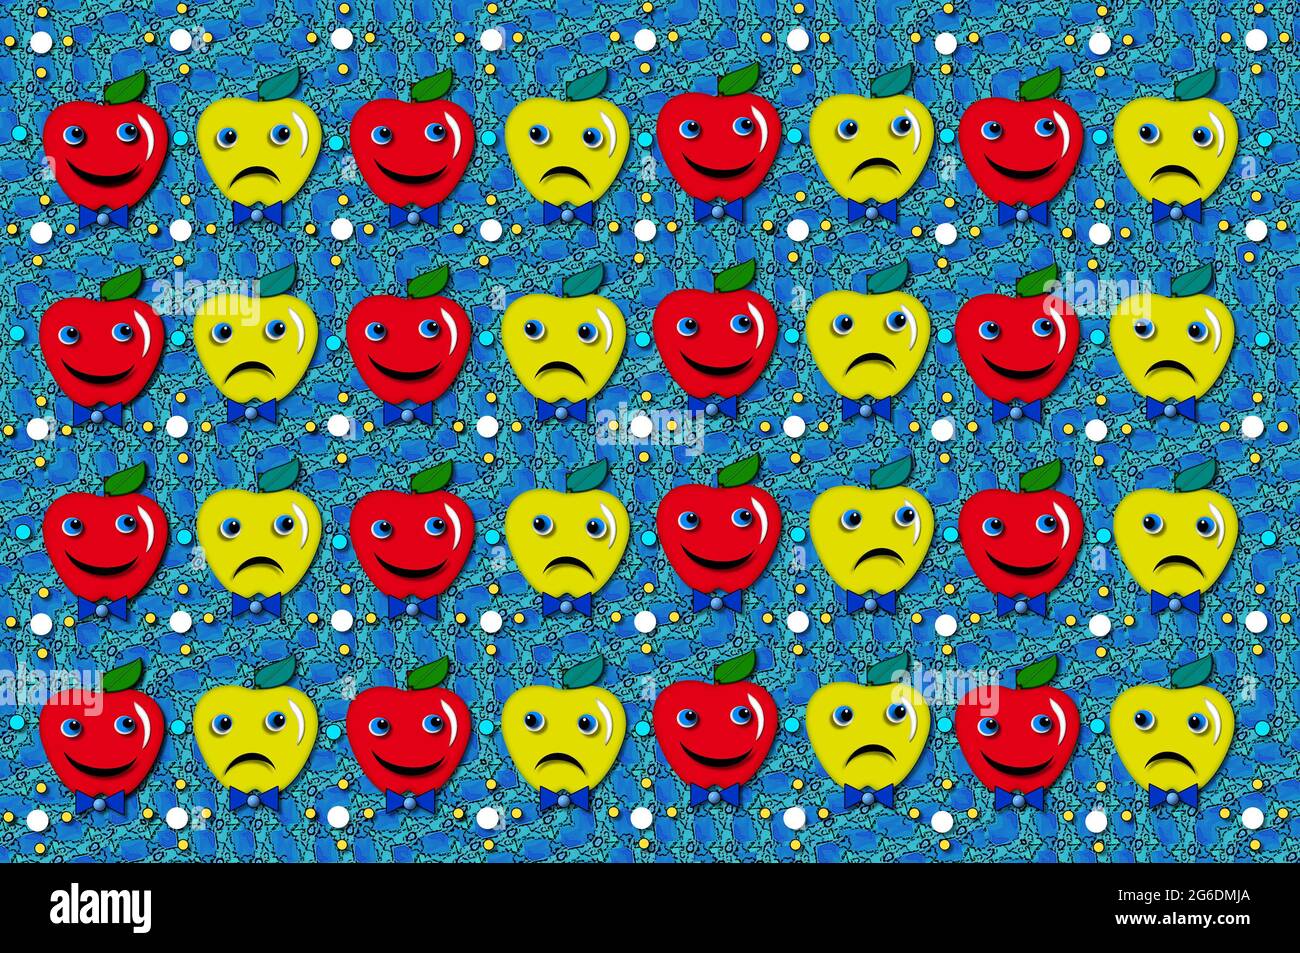 Happy and sad apples in yellow and red sit on blue print background with 2D polka dots.  Teachers can use apples to teach counting from one to thirty Stock Photo